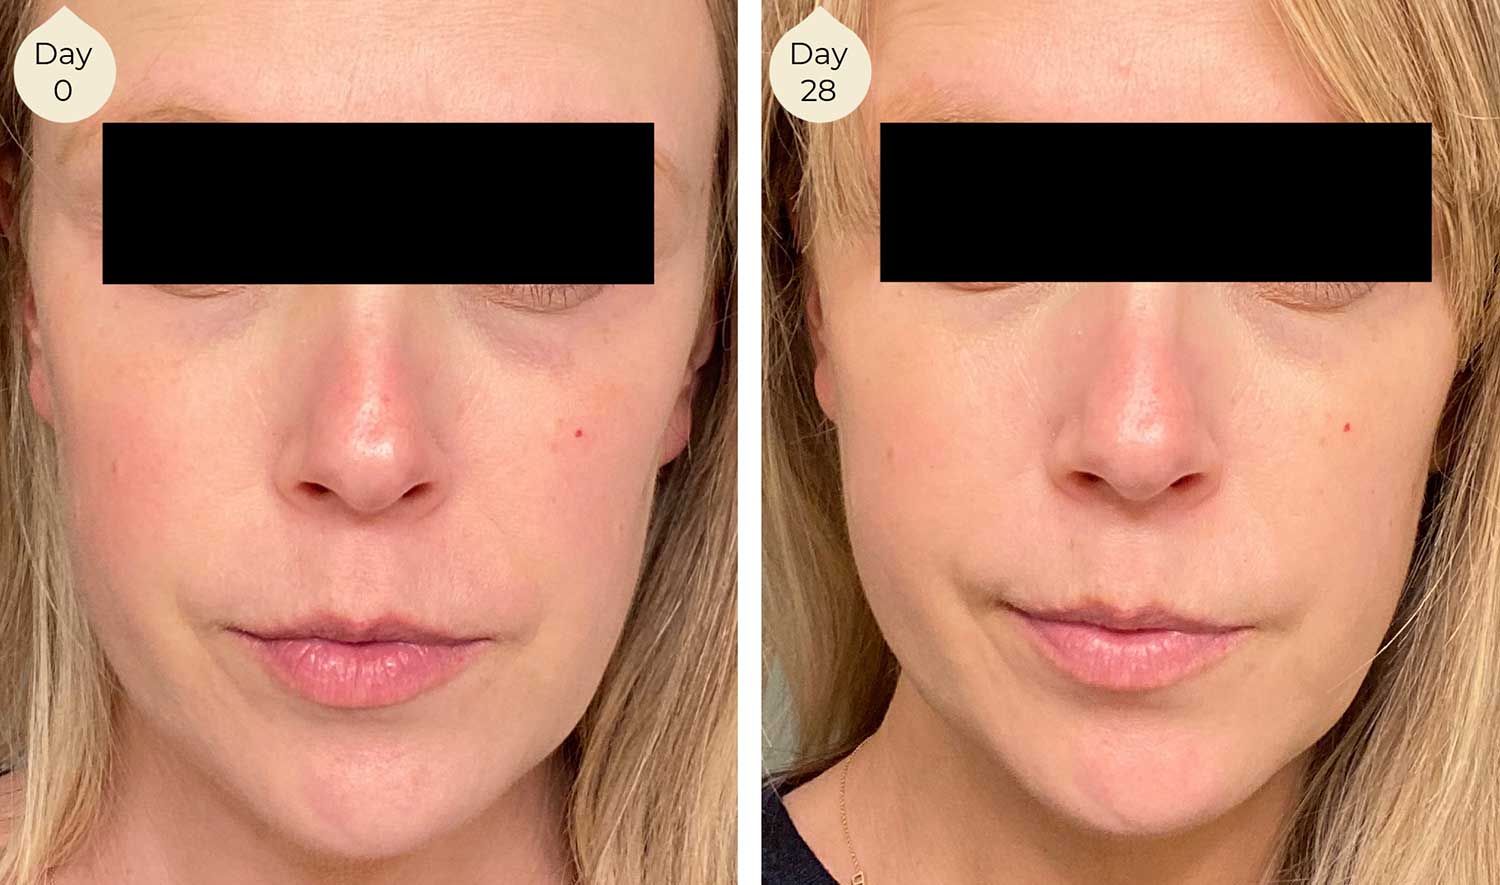 LightWater Skin Nutrition facial skincare before and after shows more even skin tone, less redness, reduced under eye circles, better overall appearance